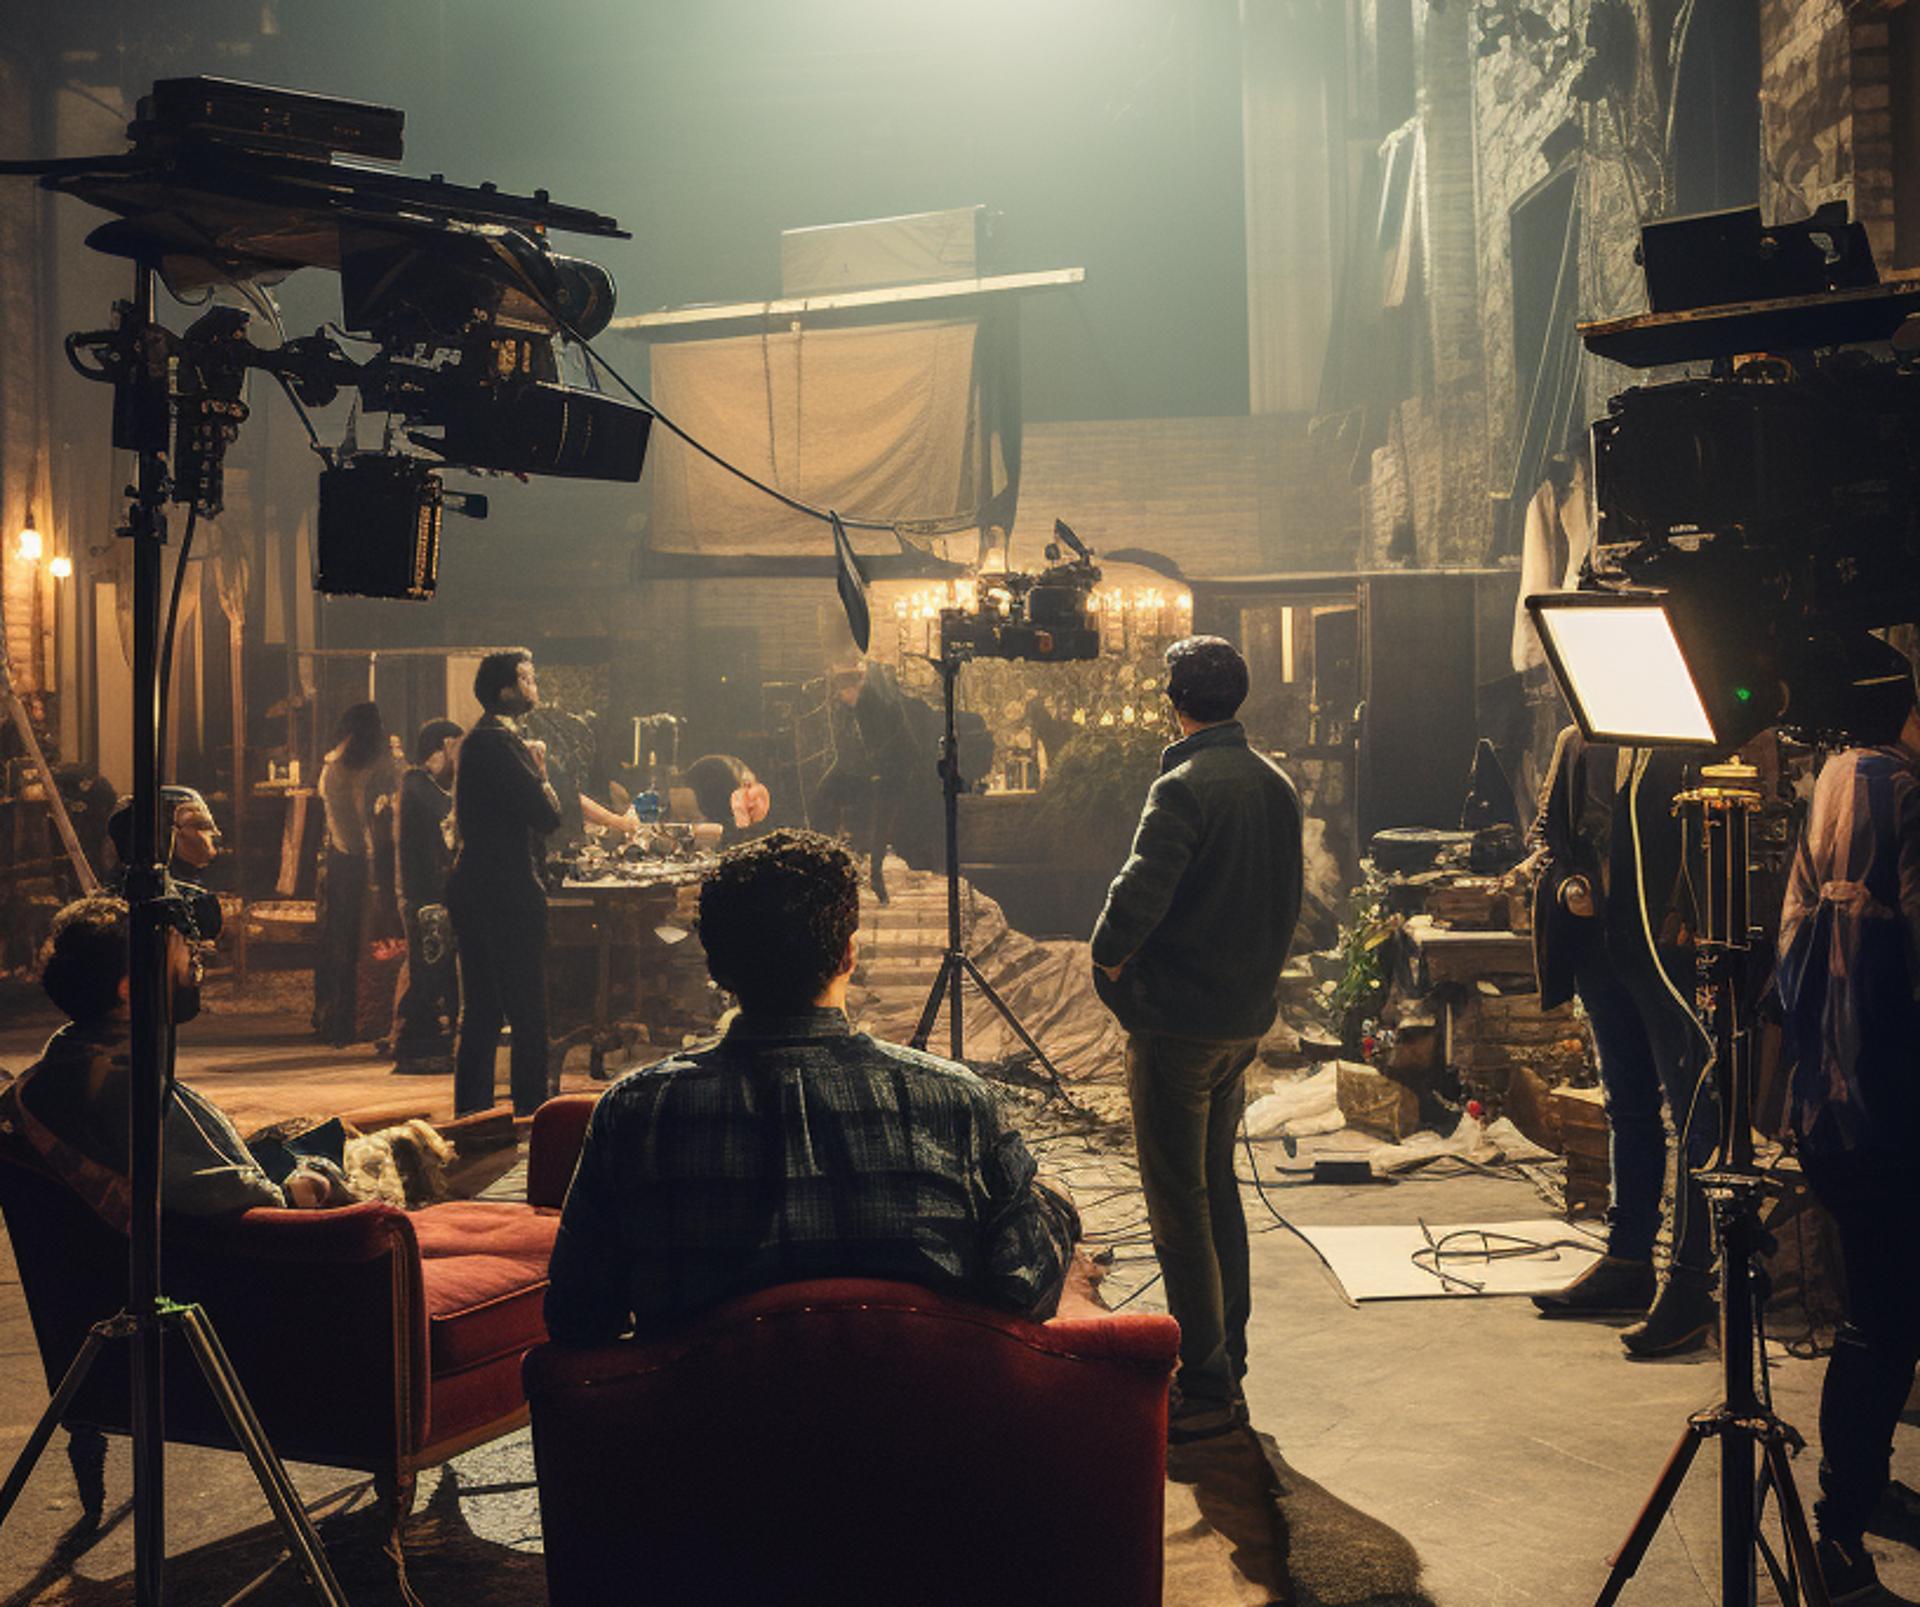 Prime Video Strikes Deal With Pinewood Group to Take UK Production  Facilities at Shepperton Studios